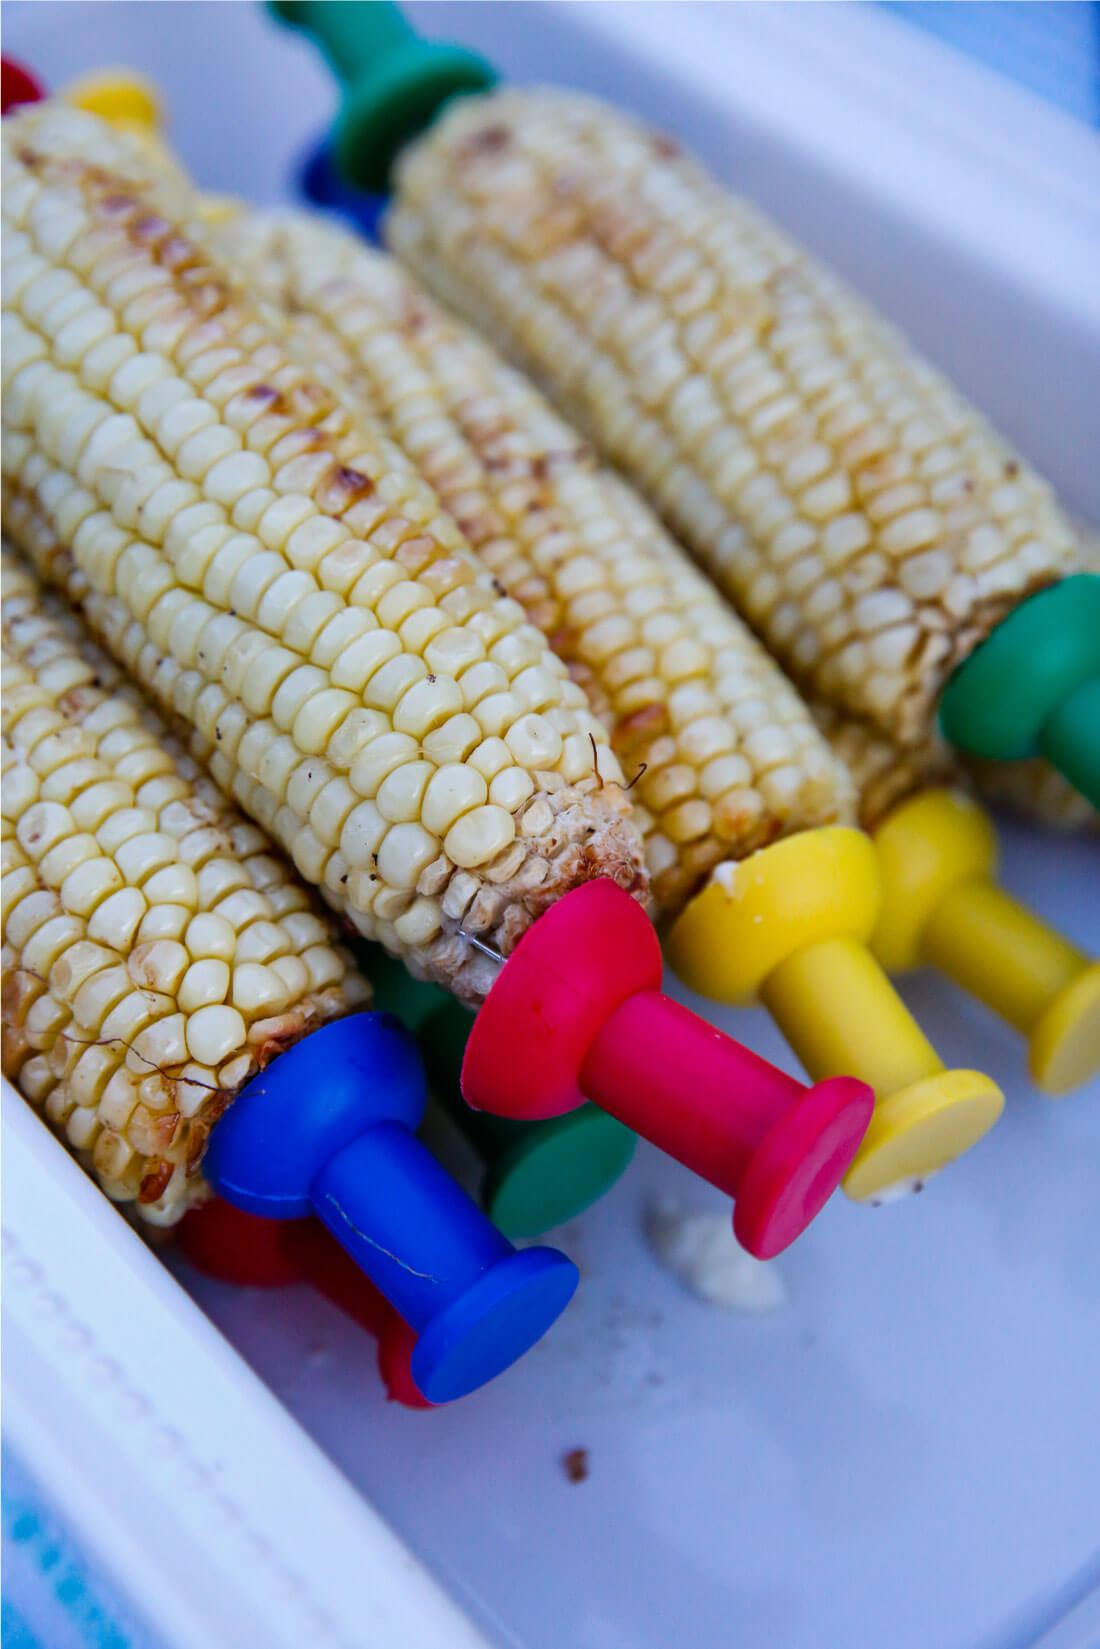 Oven Baked Corn on the Cob for a summer party - so delicious! from www.thirtyhandmadedays.com